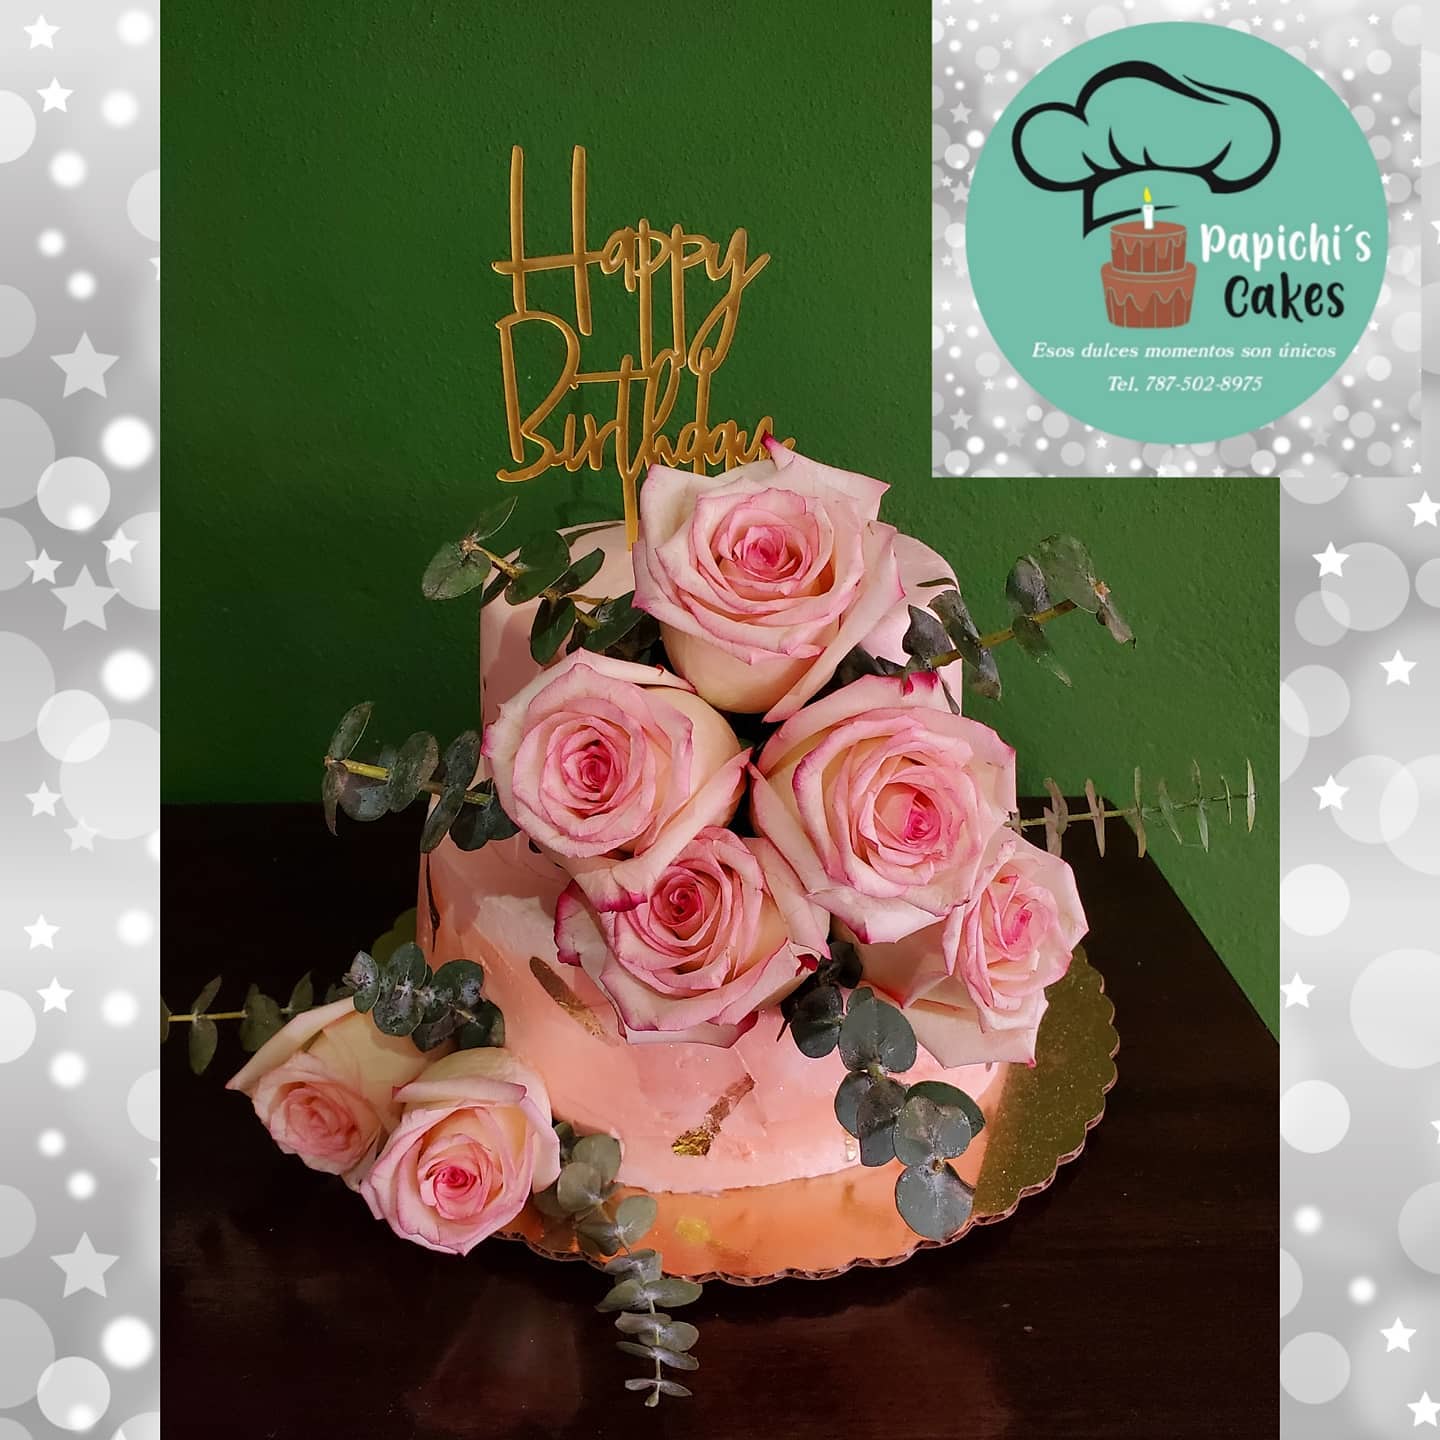 Cake by Papichi's Cakes